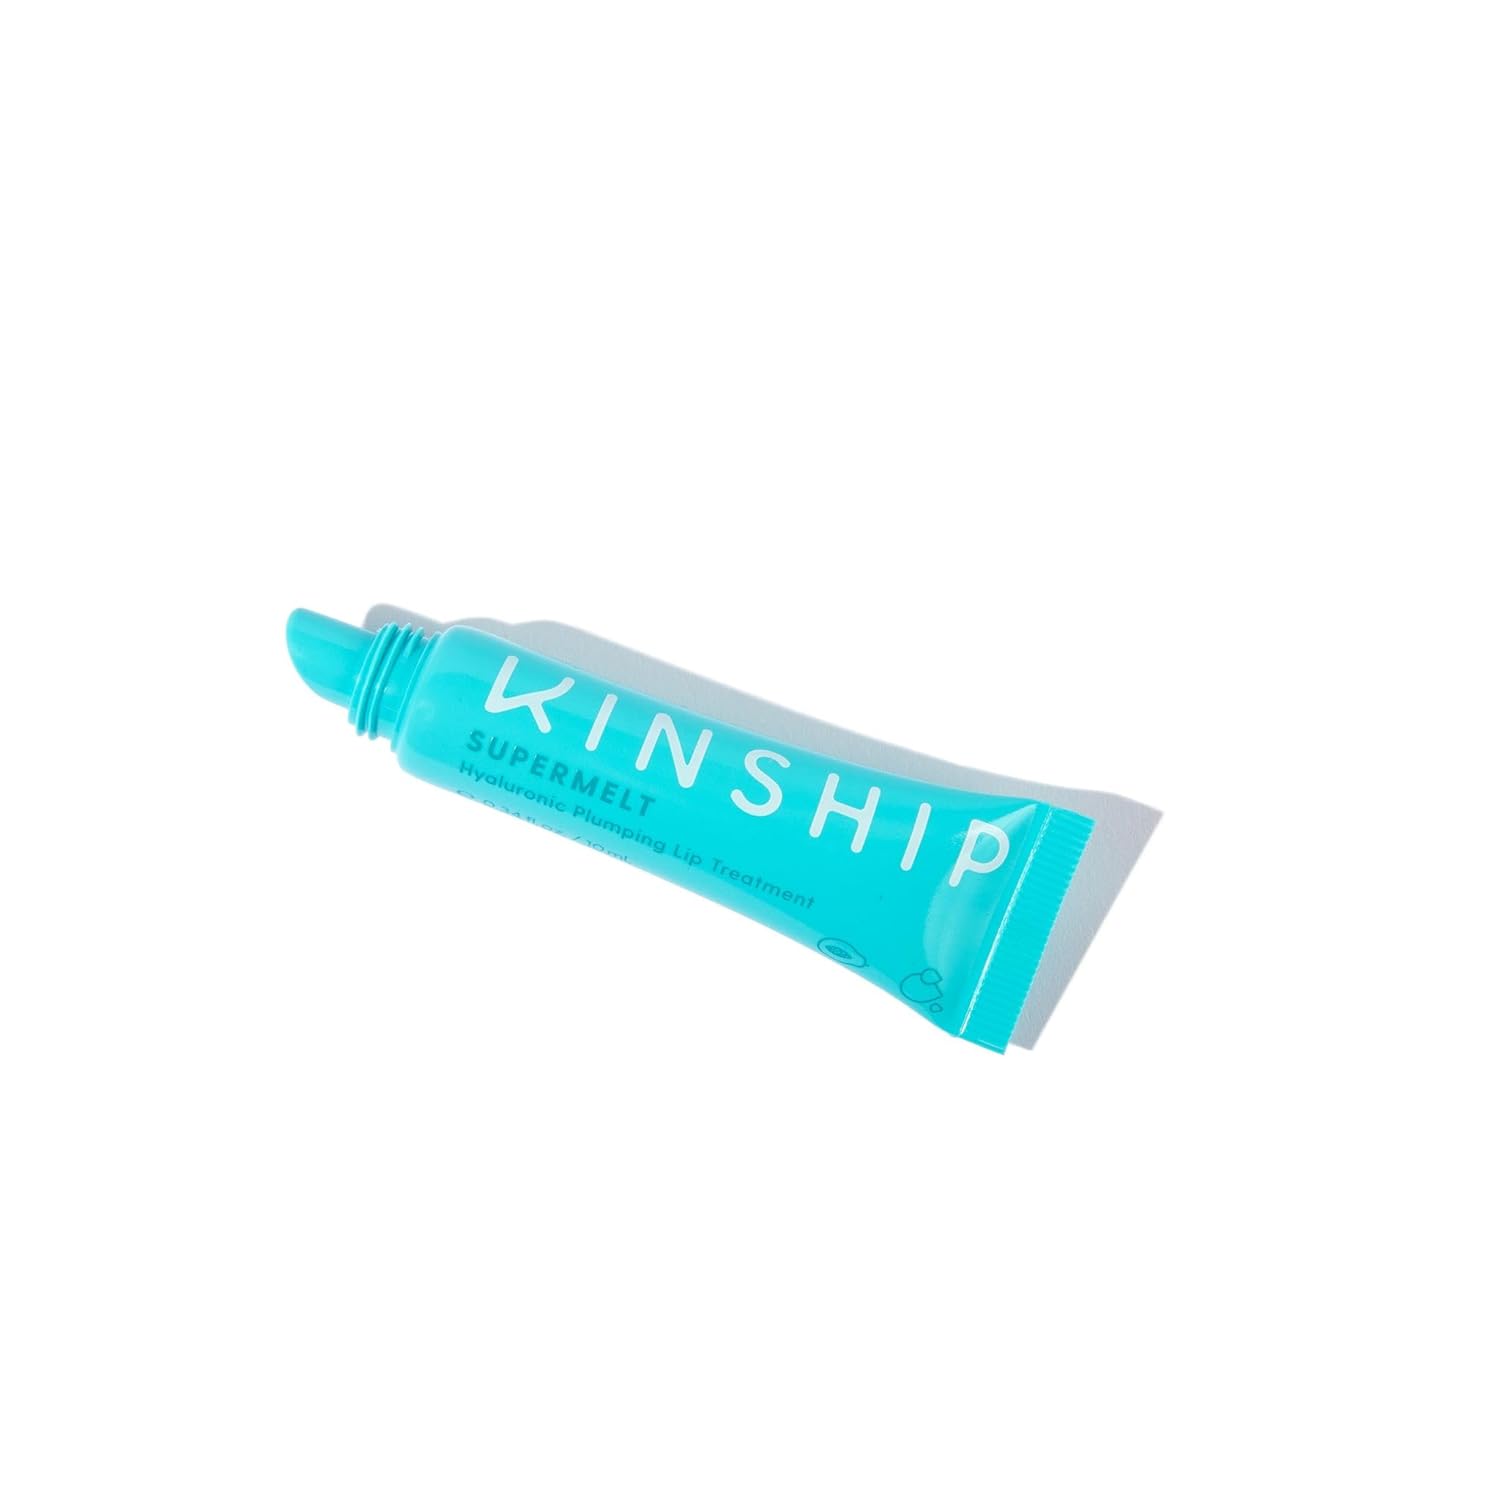 Kinship Supermelt Lip Plumping Jelly Mask | Moisturizing Daily Lip Treatment + Hyaluronic Acid | Hydrating + Exfoliating Lip Gloss | Soft, Smooth, Plump | Quick Melting Balm | Soothe Dry Lips (.3 oz) : Beauty & Personal Care